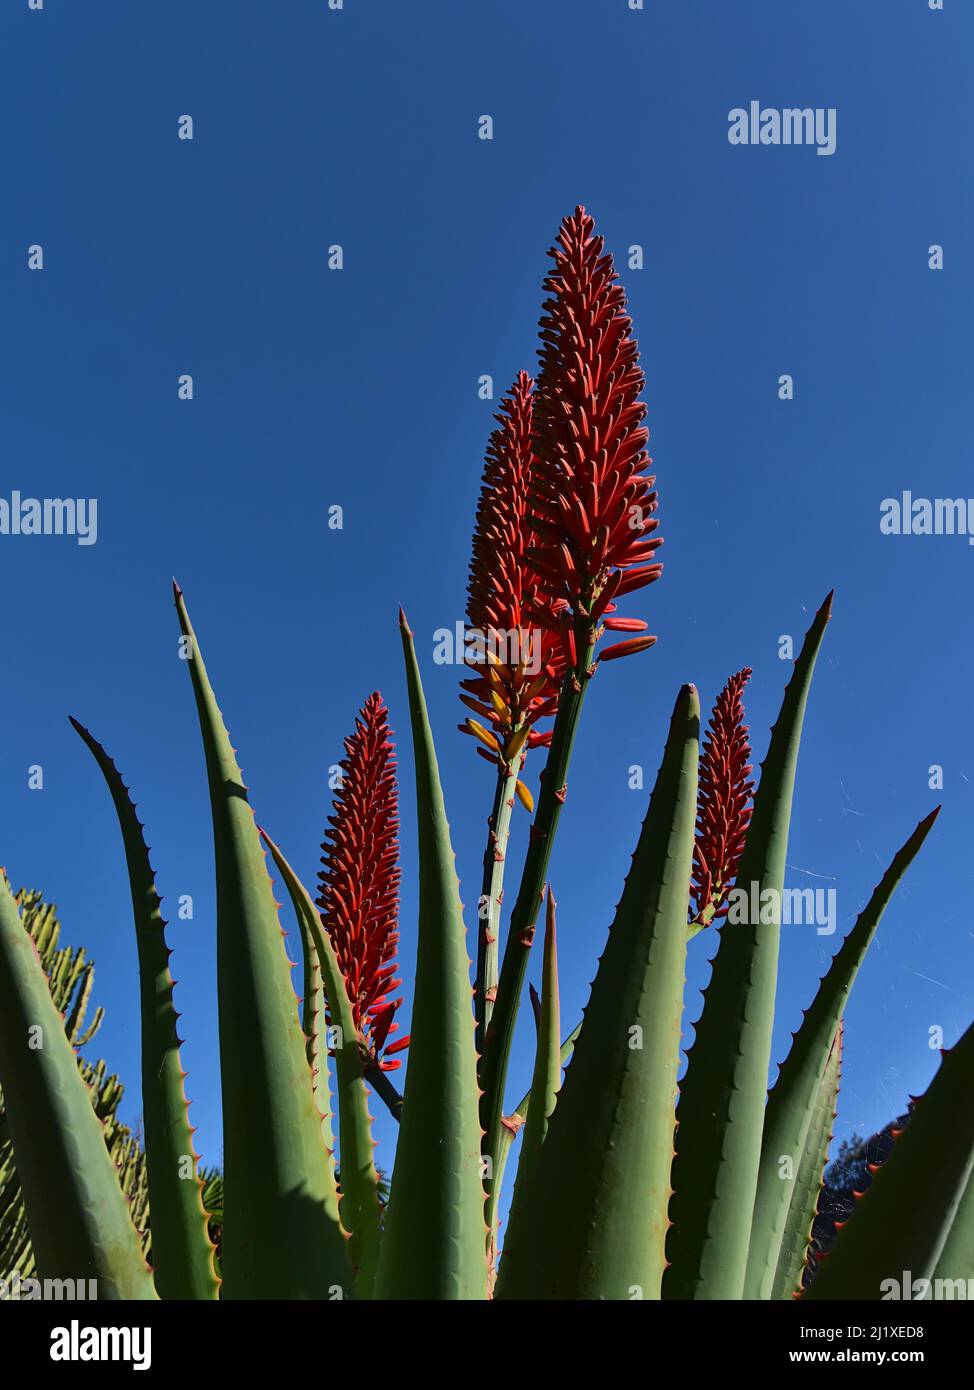 Close-up low angle view of an Aloe mutabilis plant with green leaves and red colored inflorescence in winter season on sunny day with blue sky. Stock Photo